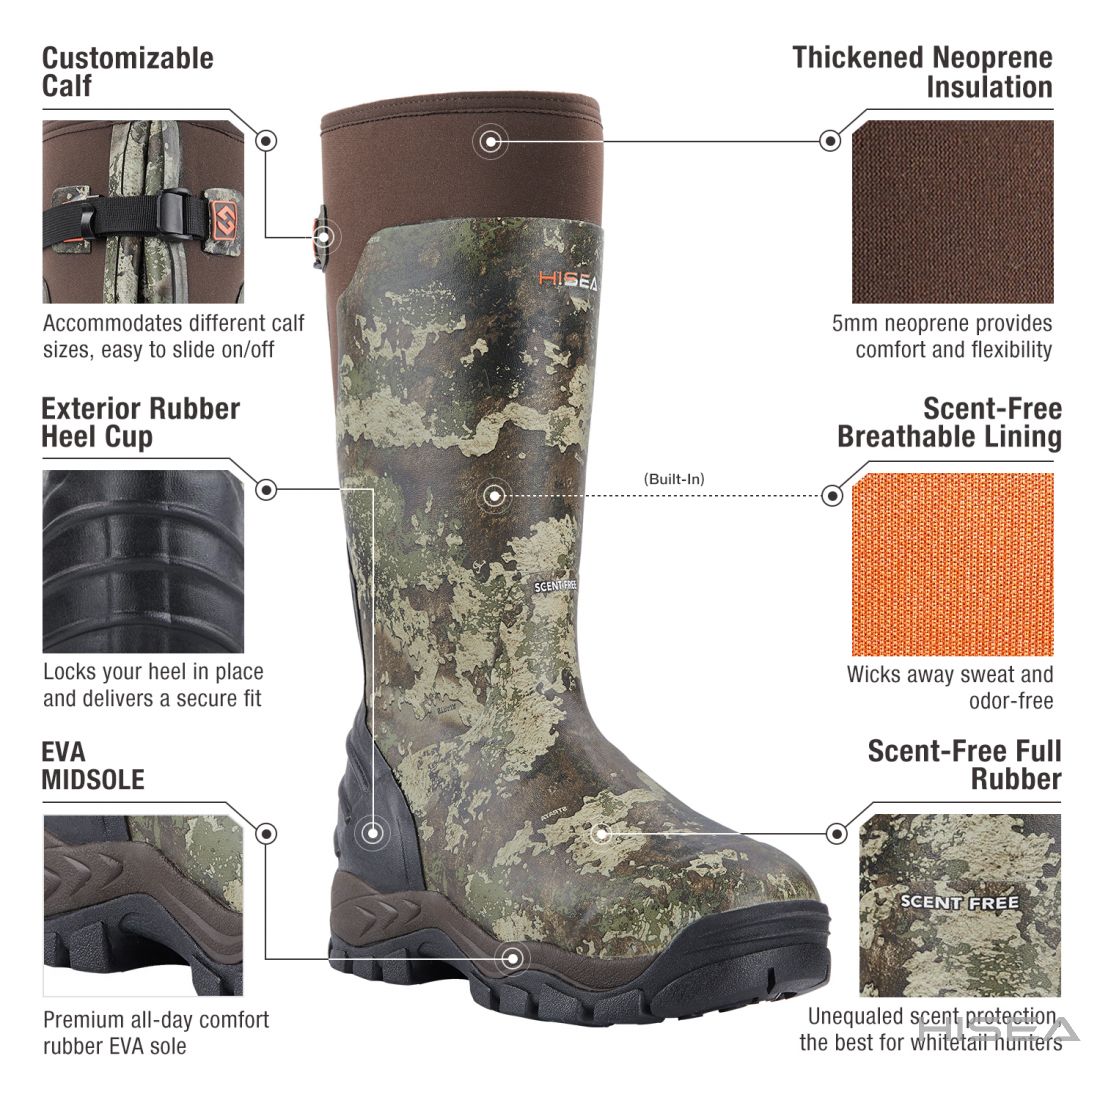 Apollo Pro 400G Insulated Hunting Boots